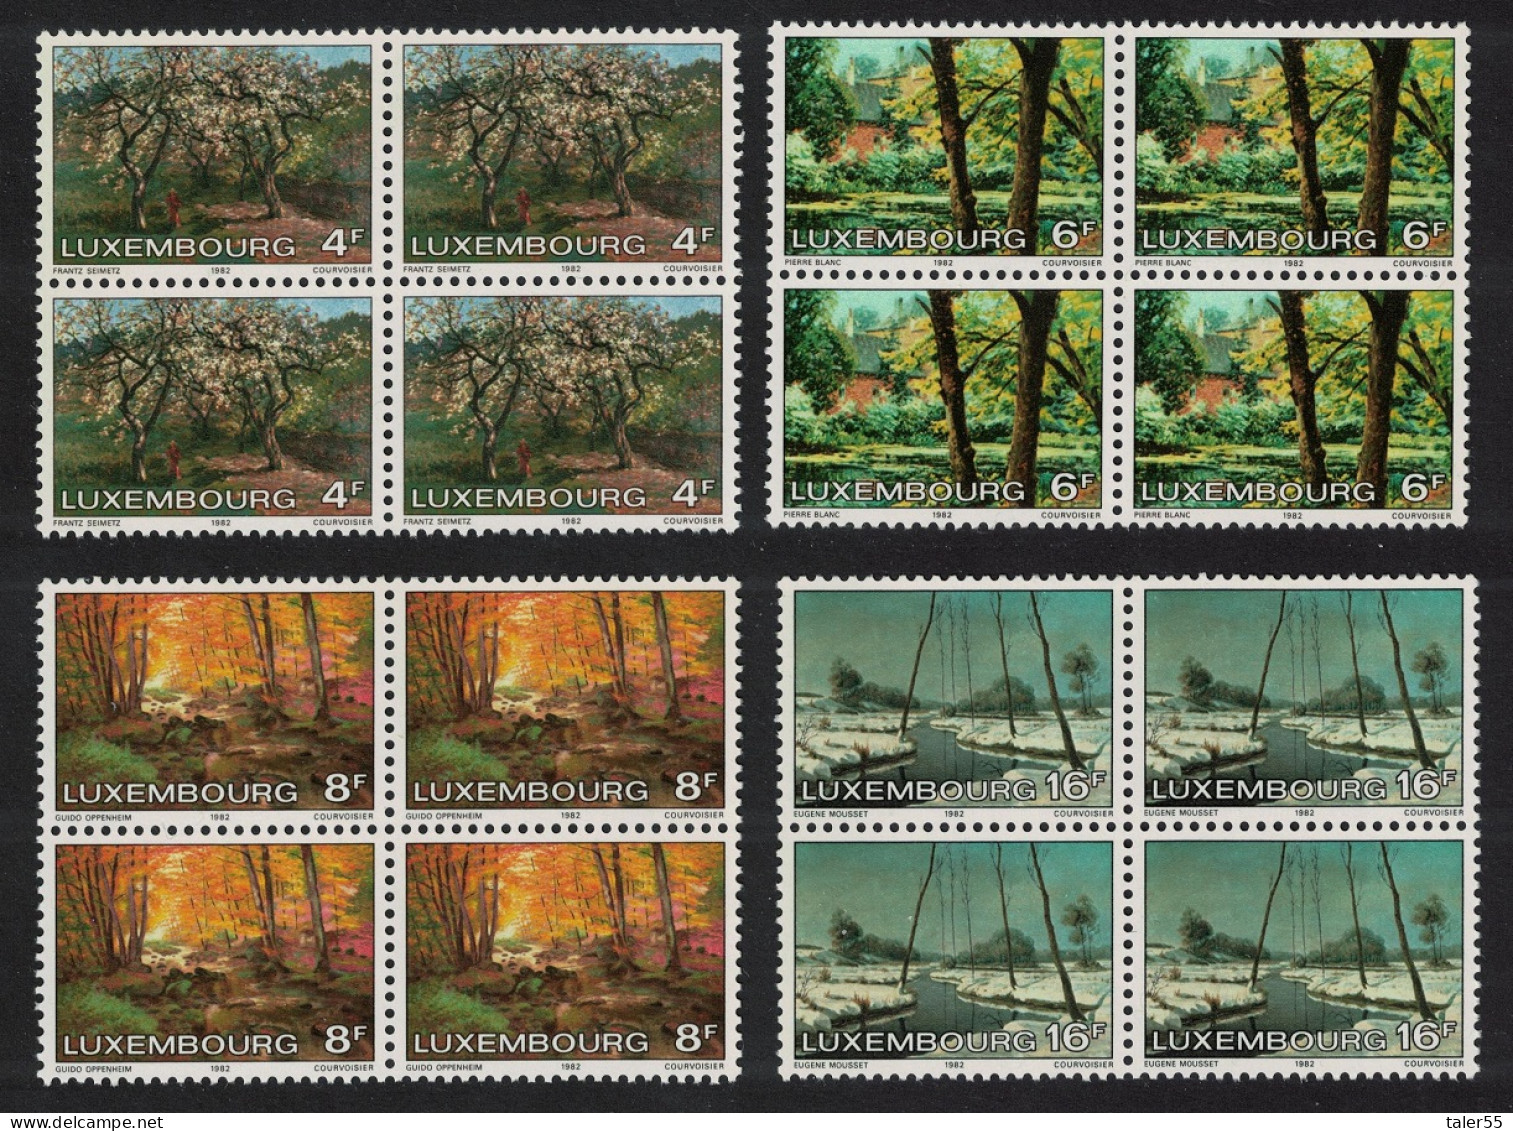 Luxembourg Paintings Landscapes 4v Blocks Of 4 1982 MNH SG#1081-1084 MI#1046-1049 - Unused Stamps